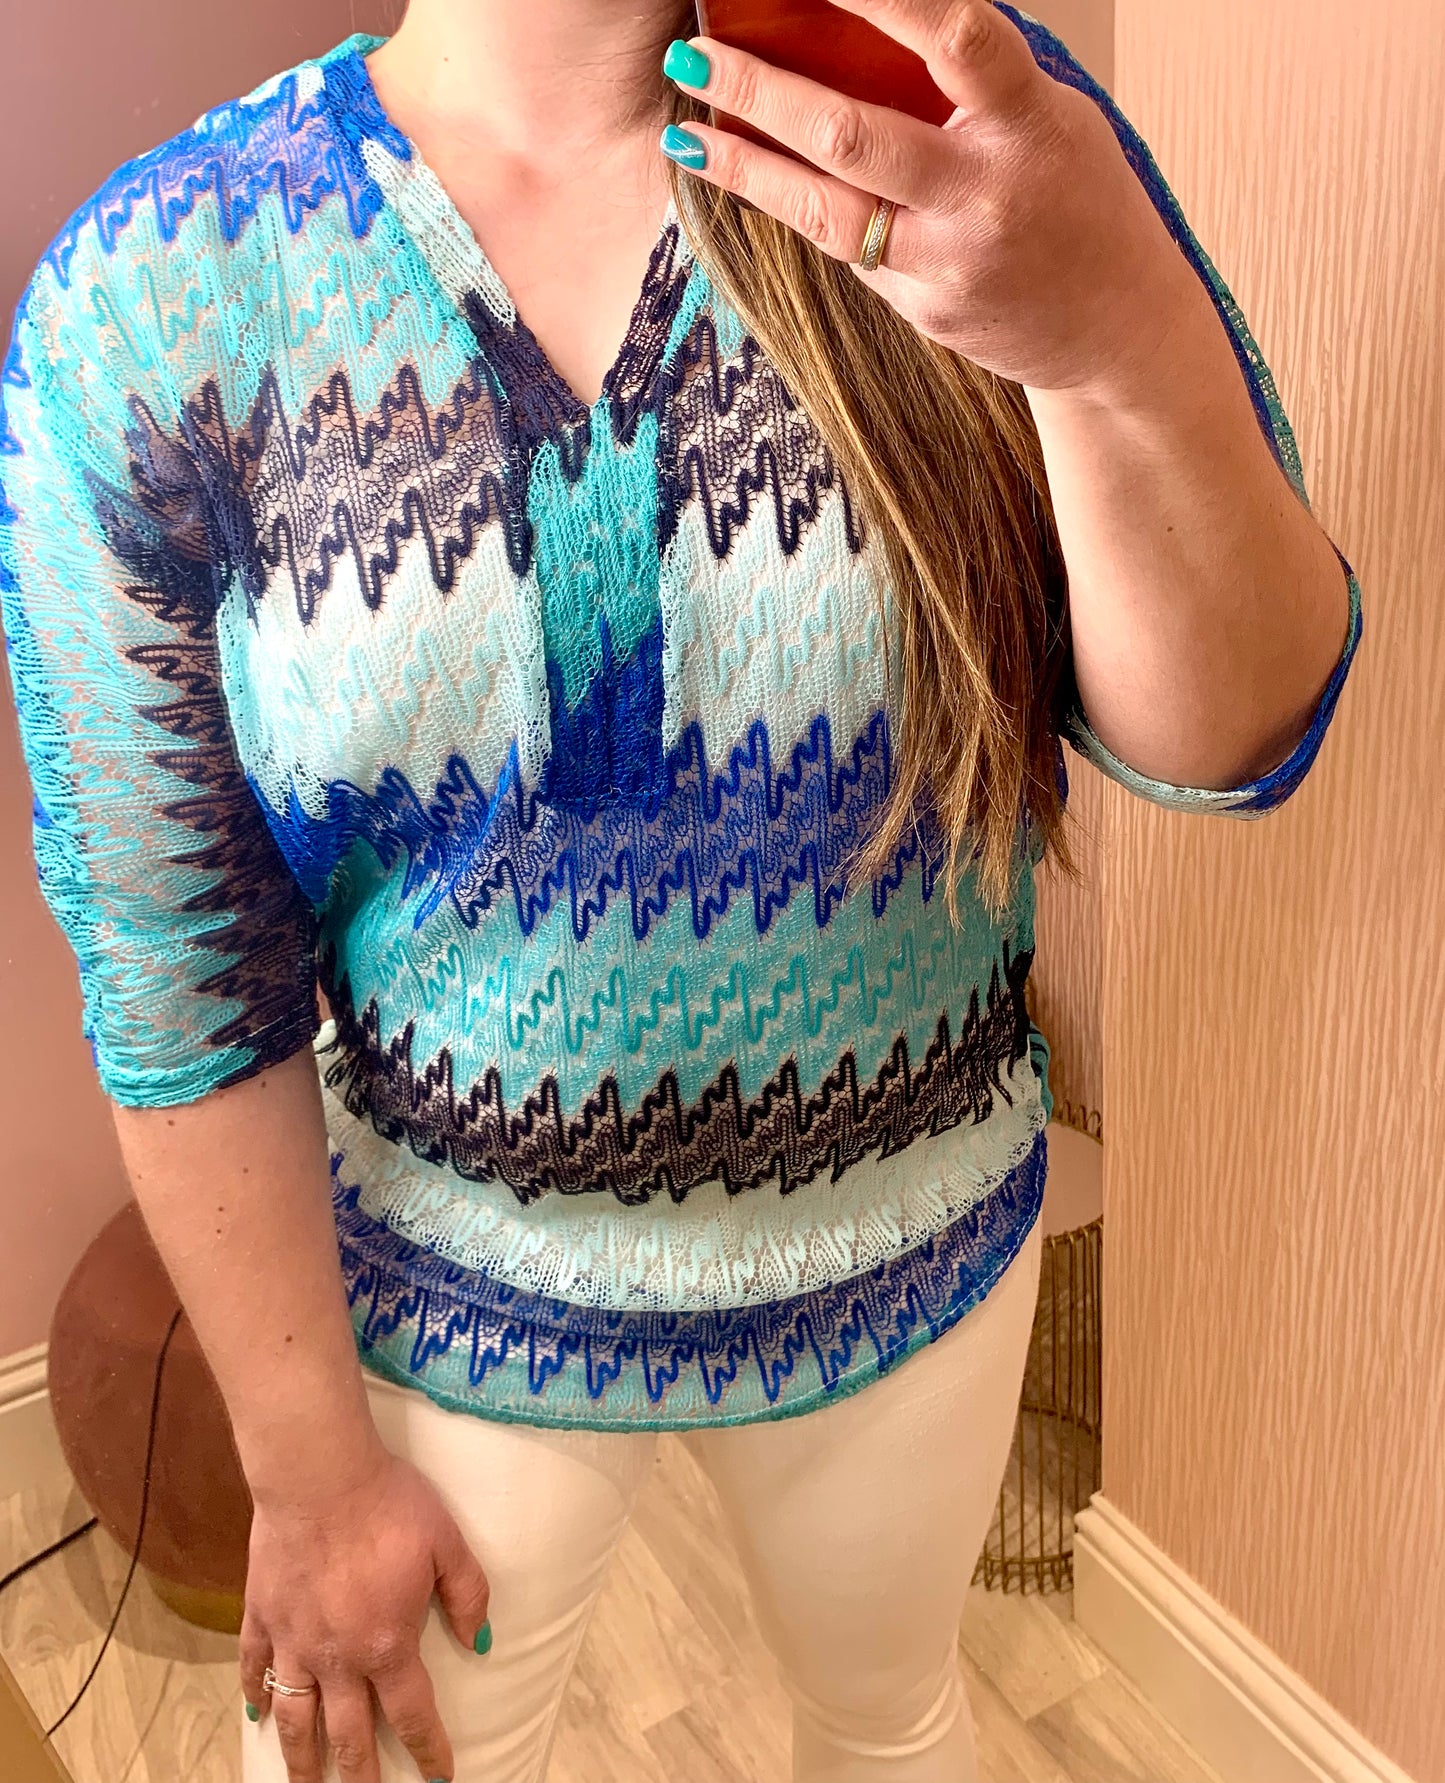 Close up of a female stood in front of a pink wall and taking a photo of herself on her phone in the mirror.  She is wearing white skinny trousers and a crochet knit v-neck top.  It has three quarter length sleeves and is a zig zag knit with differing shades of blue.  Her free hand is on her thigh.